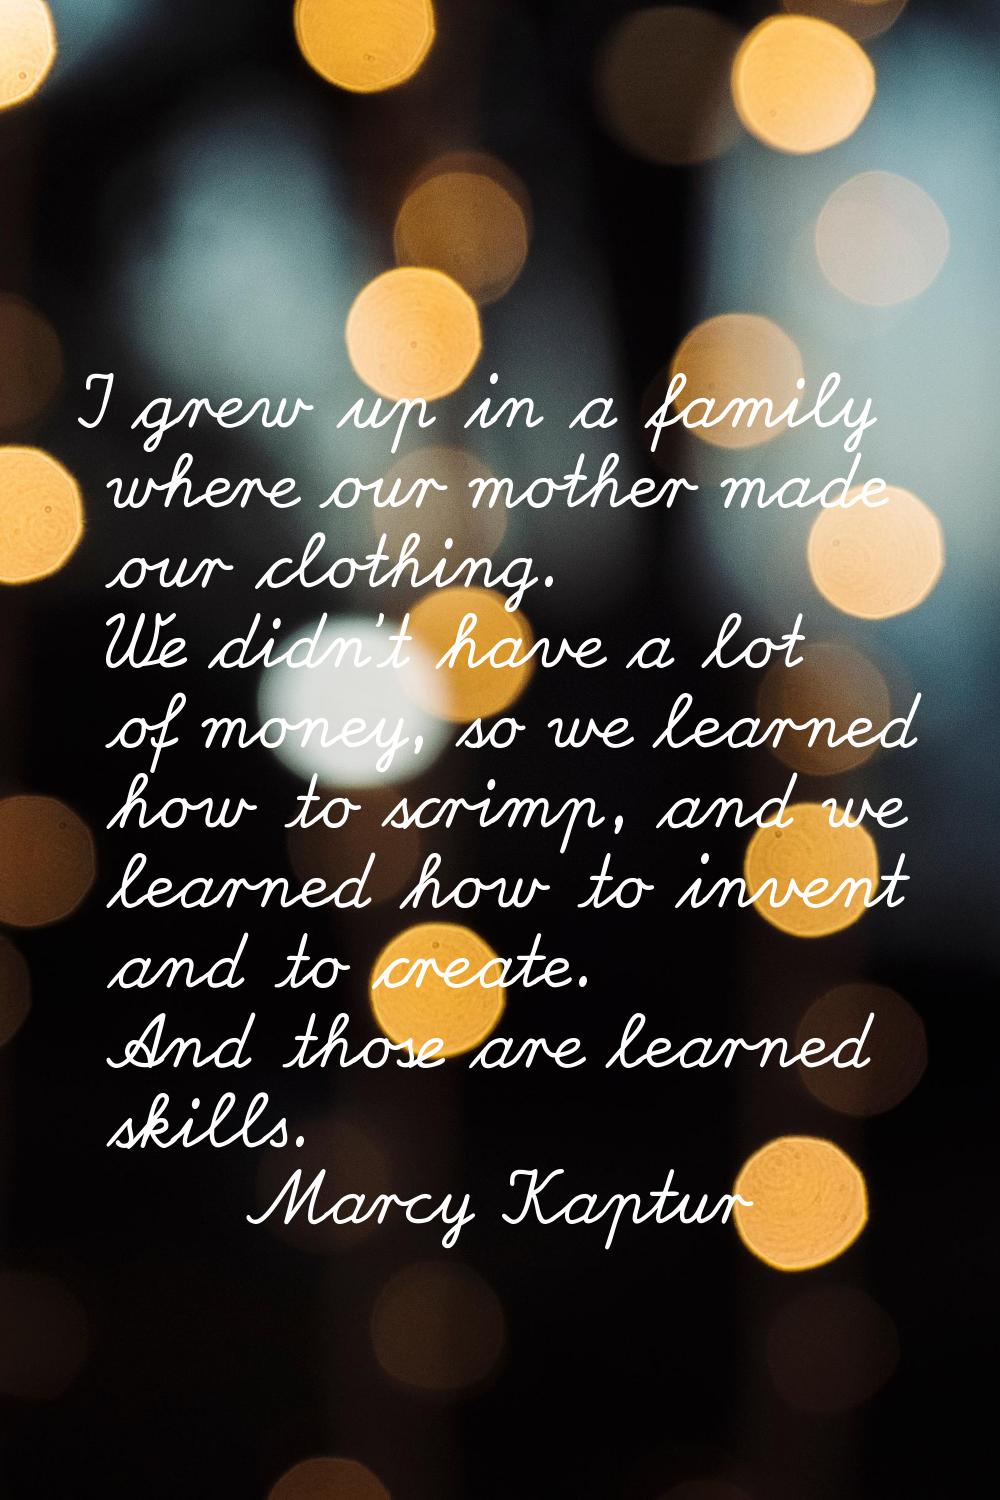 I grew up in a family where our mother made our clothing. We didn't have a lot of money, so we lear